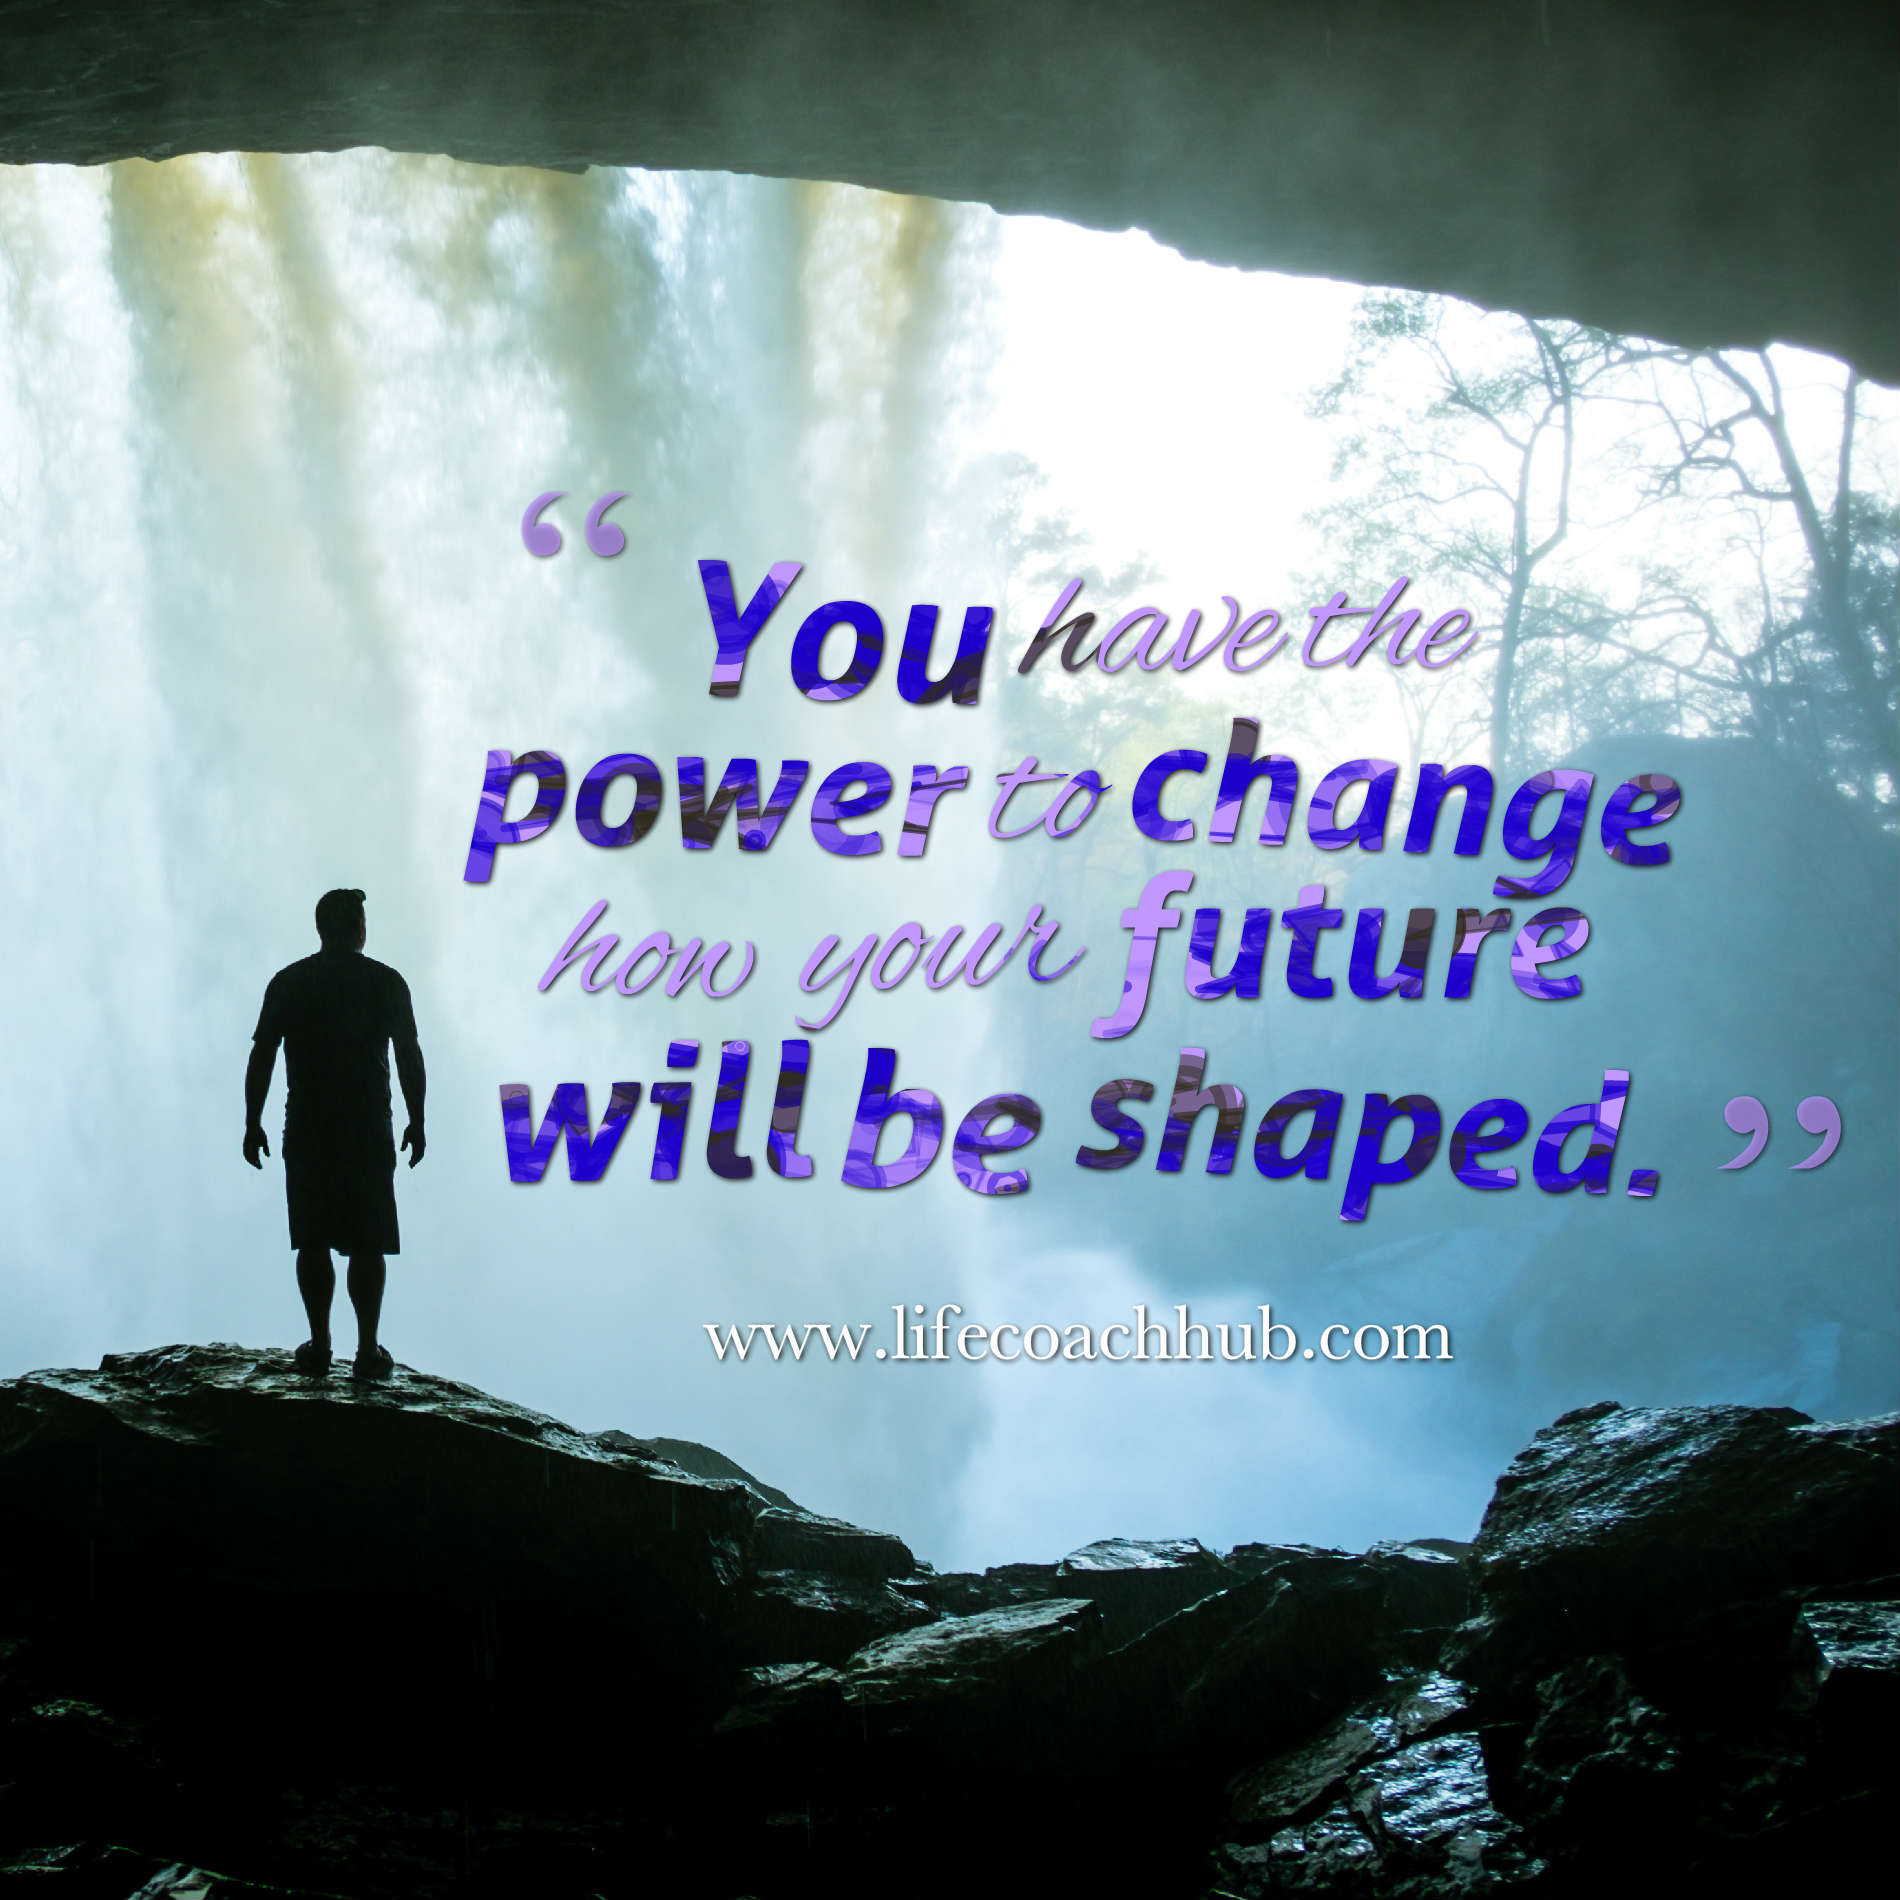 You have the power to change how your future will be shaped